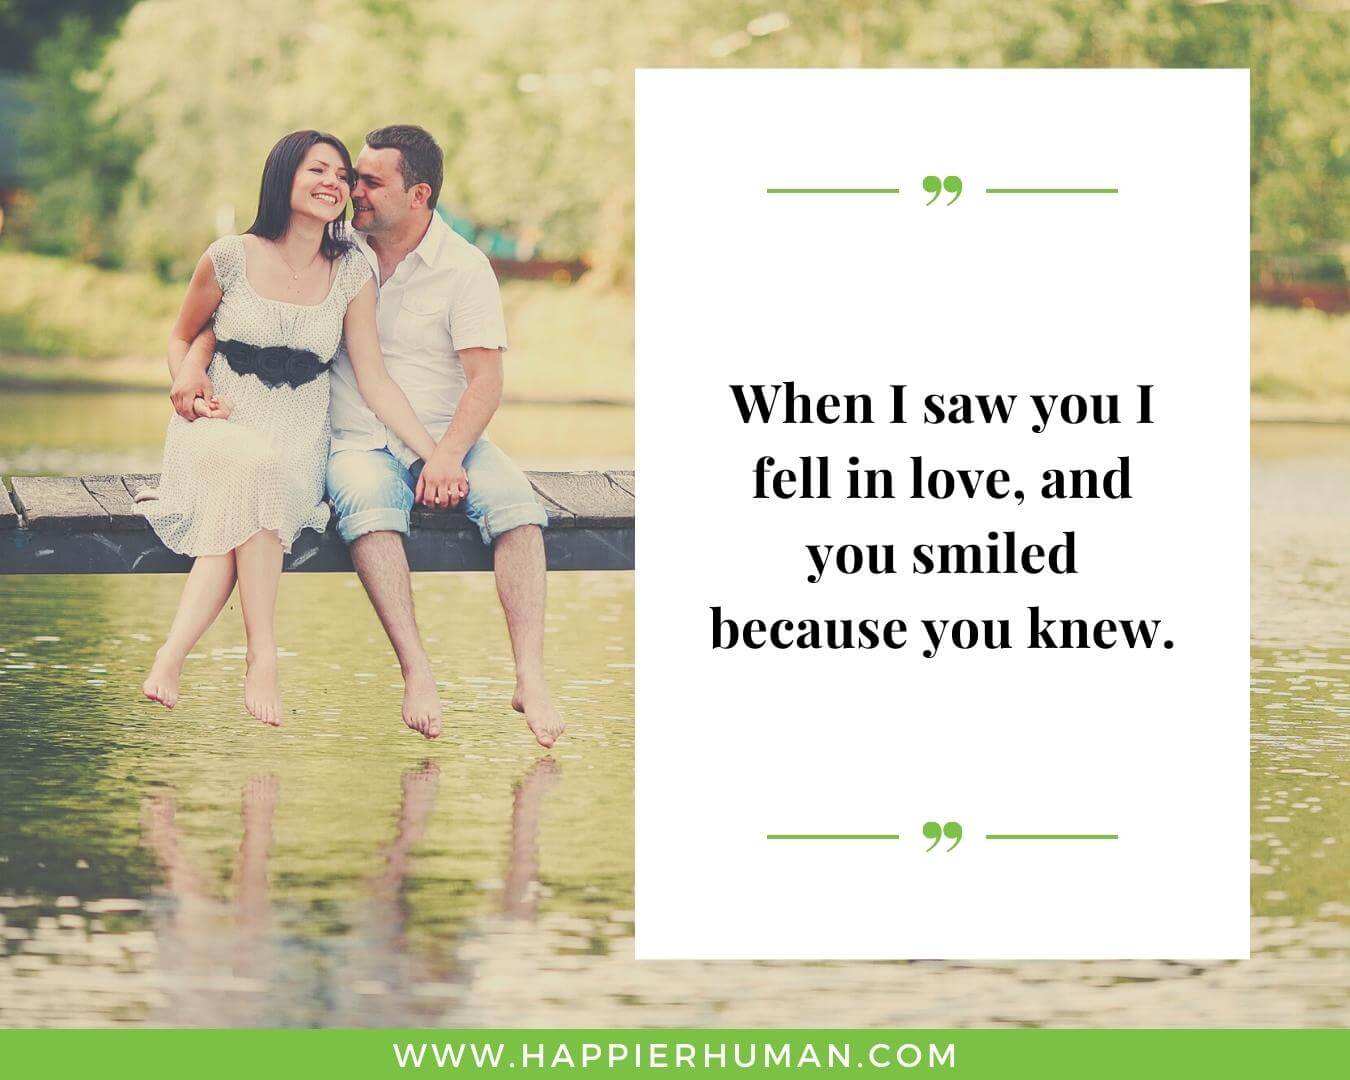 Unconditional Love Quotes for Her - “When I saw you I fell in love, and you smiled because you knew.”